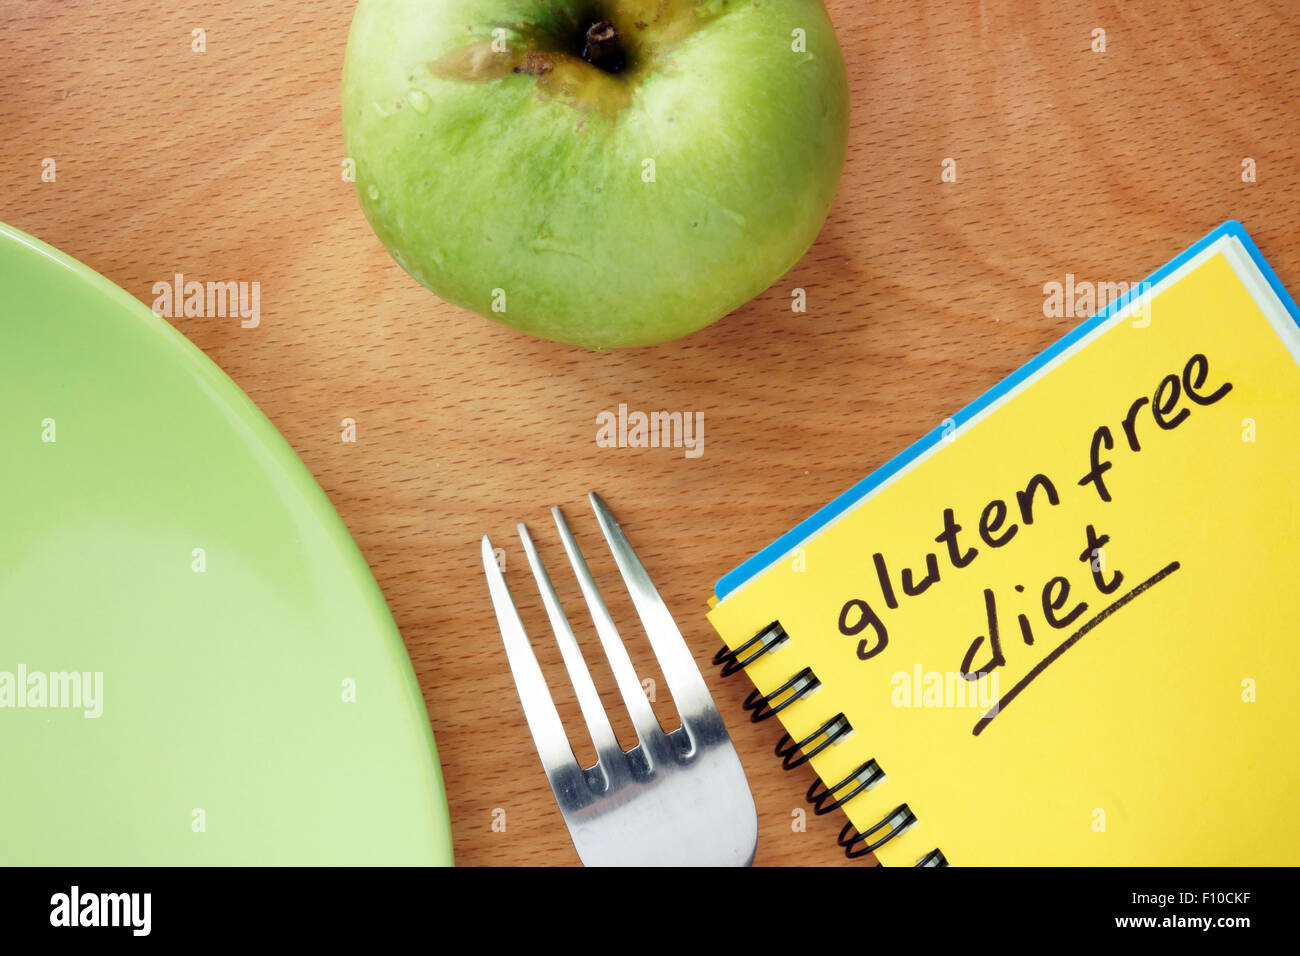 Notepad with words gluten free diet and apple. Stock Photo